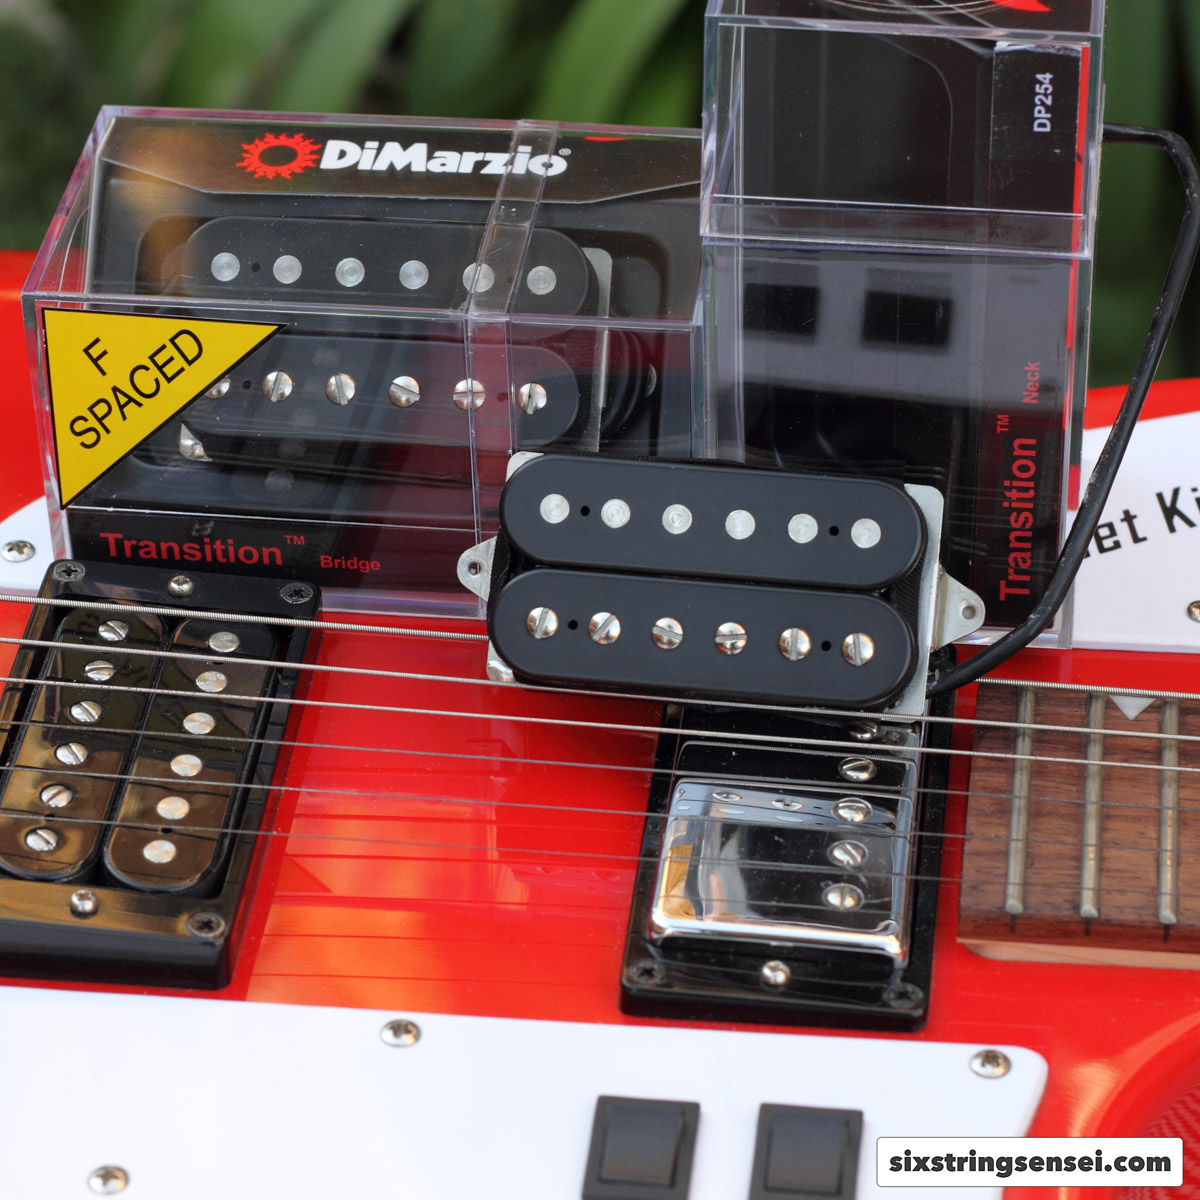 DiMarzio Steve Lukather Transition Pickups To Improve a Guitar